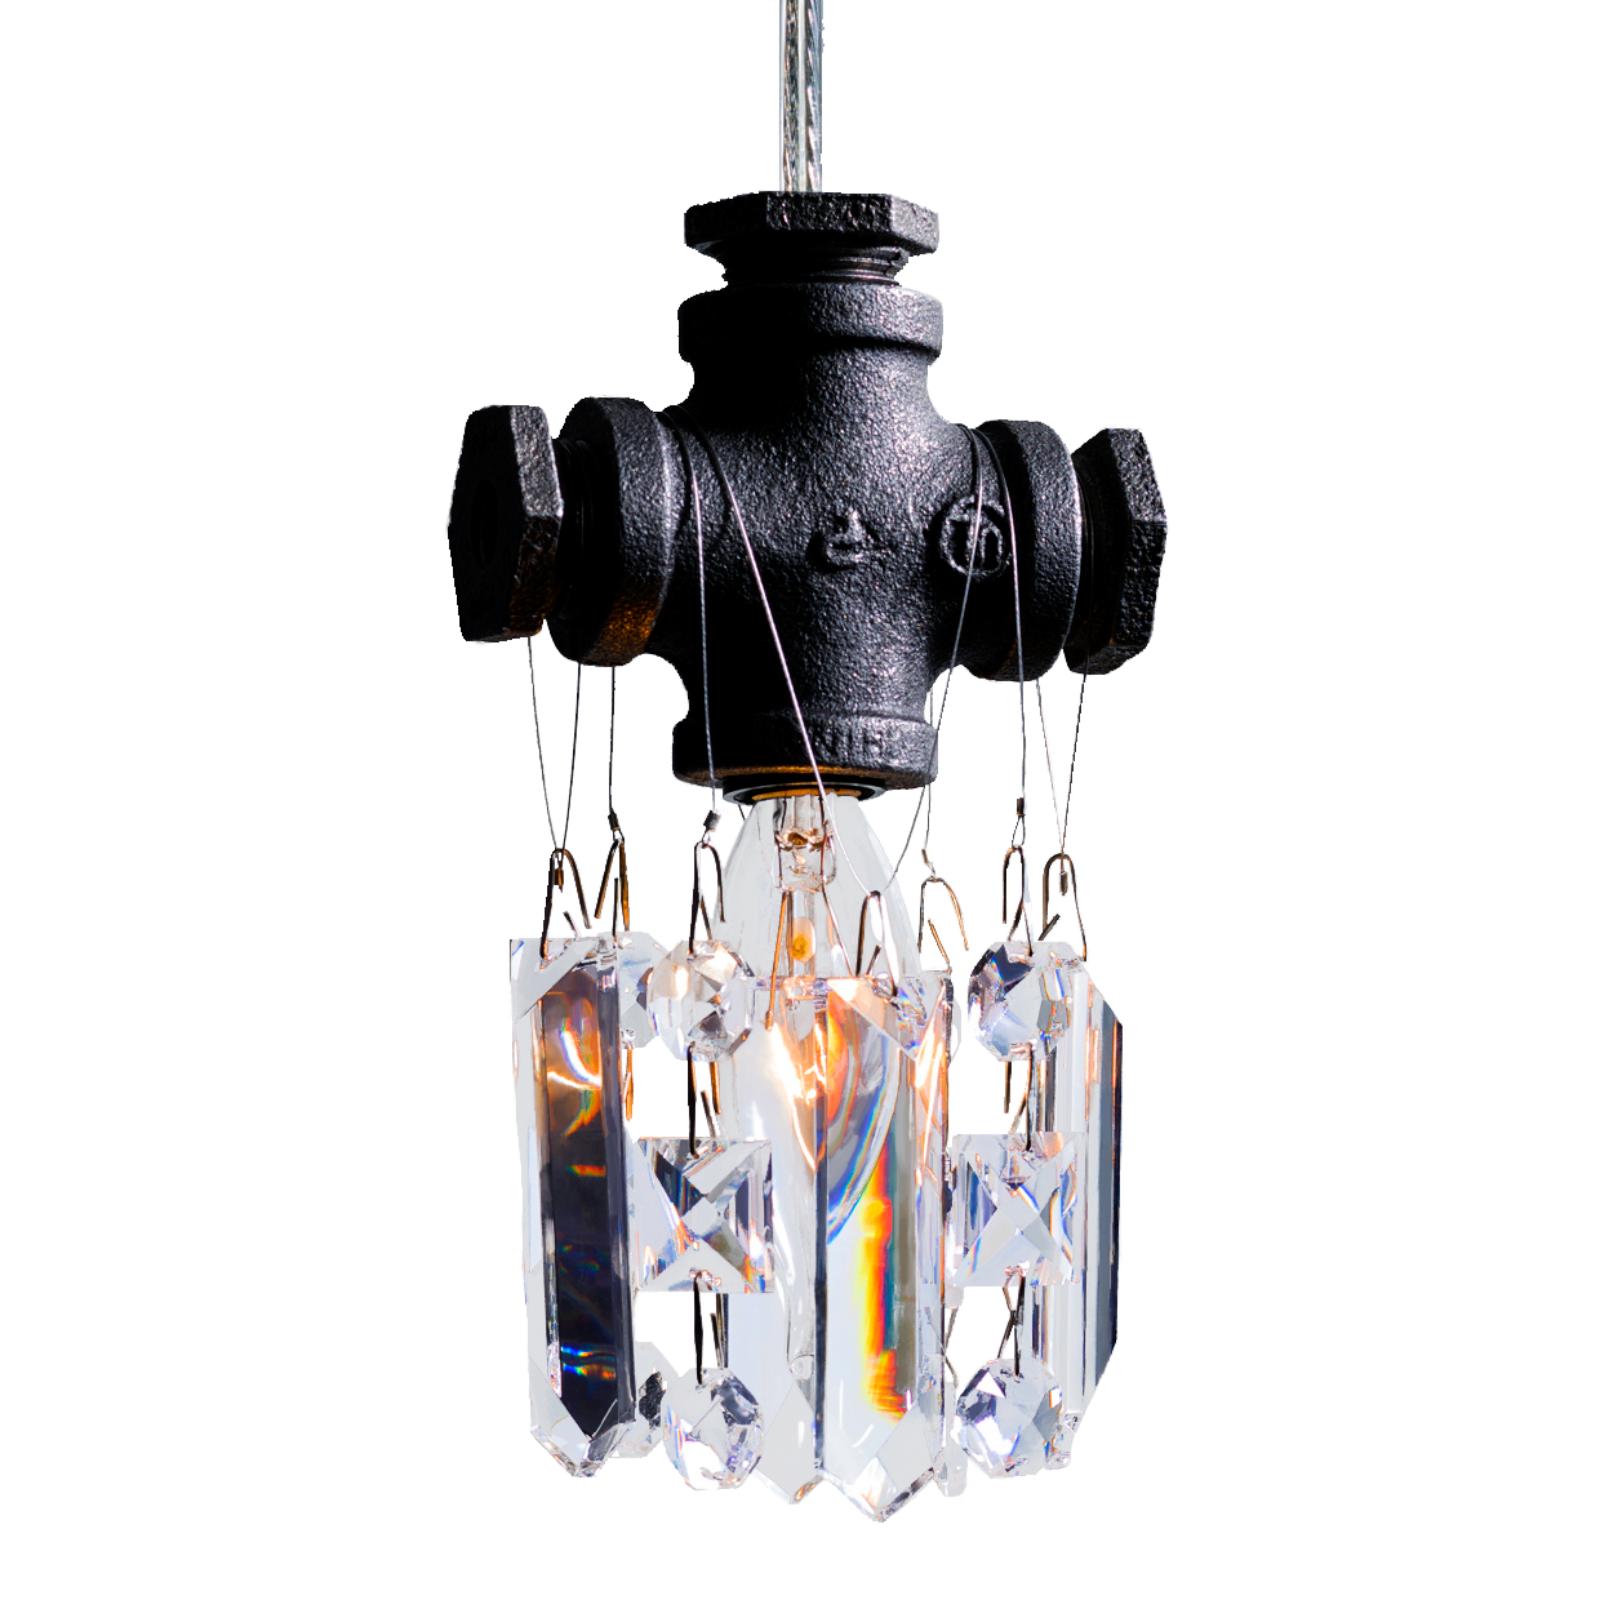 Tribeca Chandelier Pendant, Single Bulb, by Michael McHale.
Dimensions: D 3.8 x W 11.5 x H 12.7 cm.
Materials: steel, optically-pure gem-cut crystal.

1 x candelabra base CA7 bulb, either incandescent or LED

All our lamps can be wired